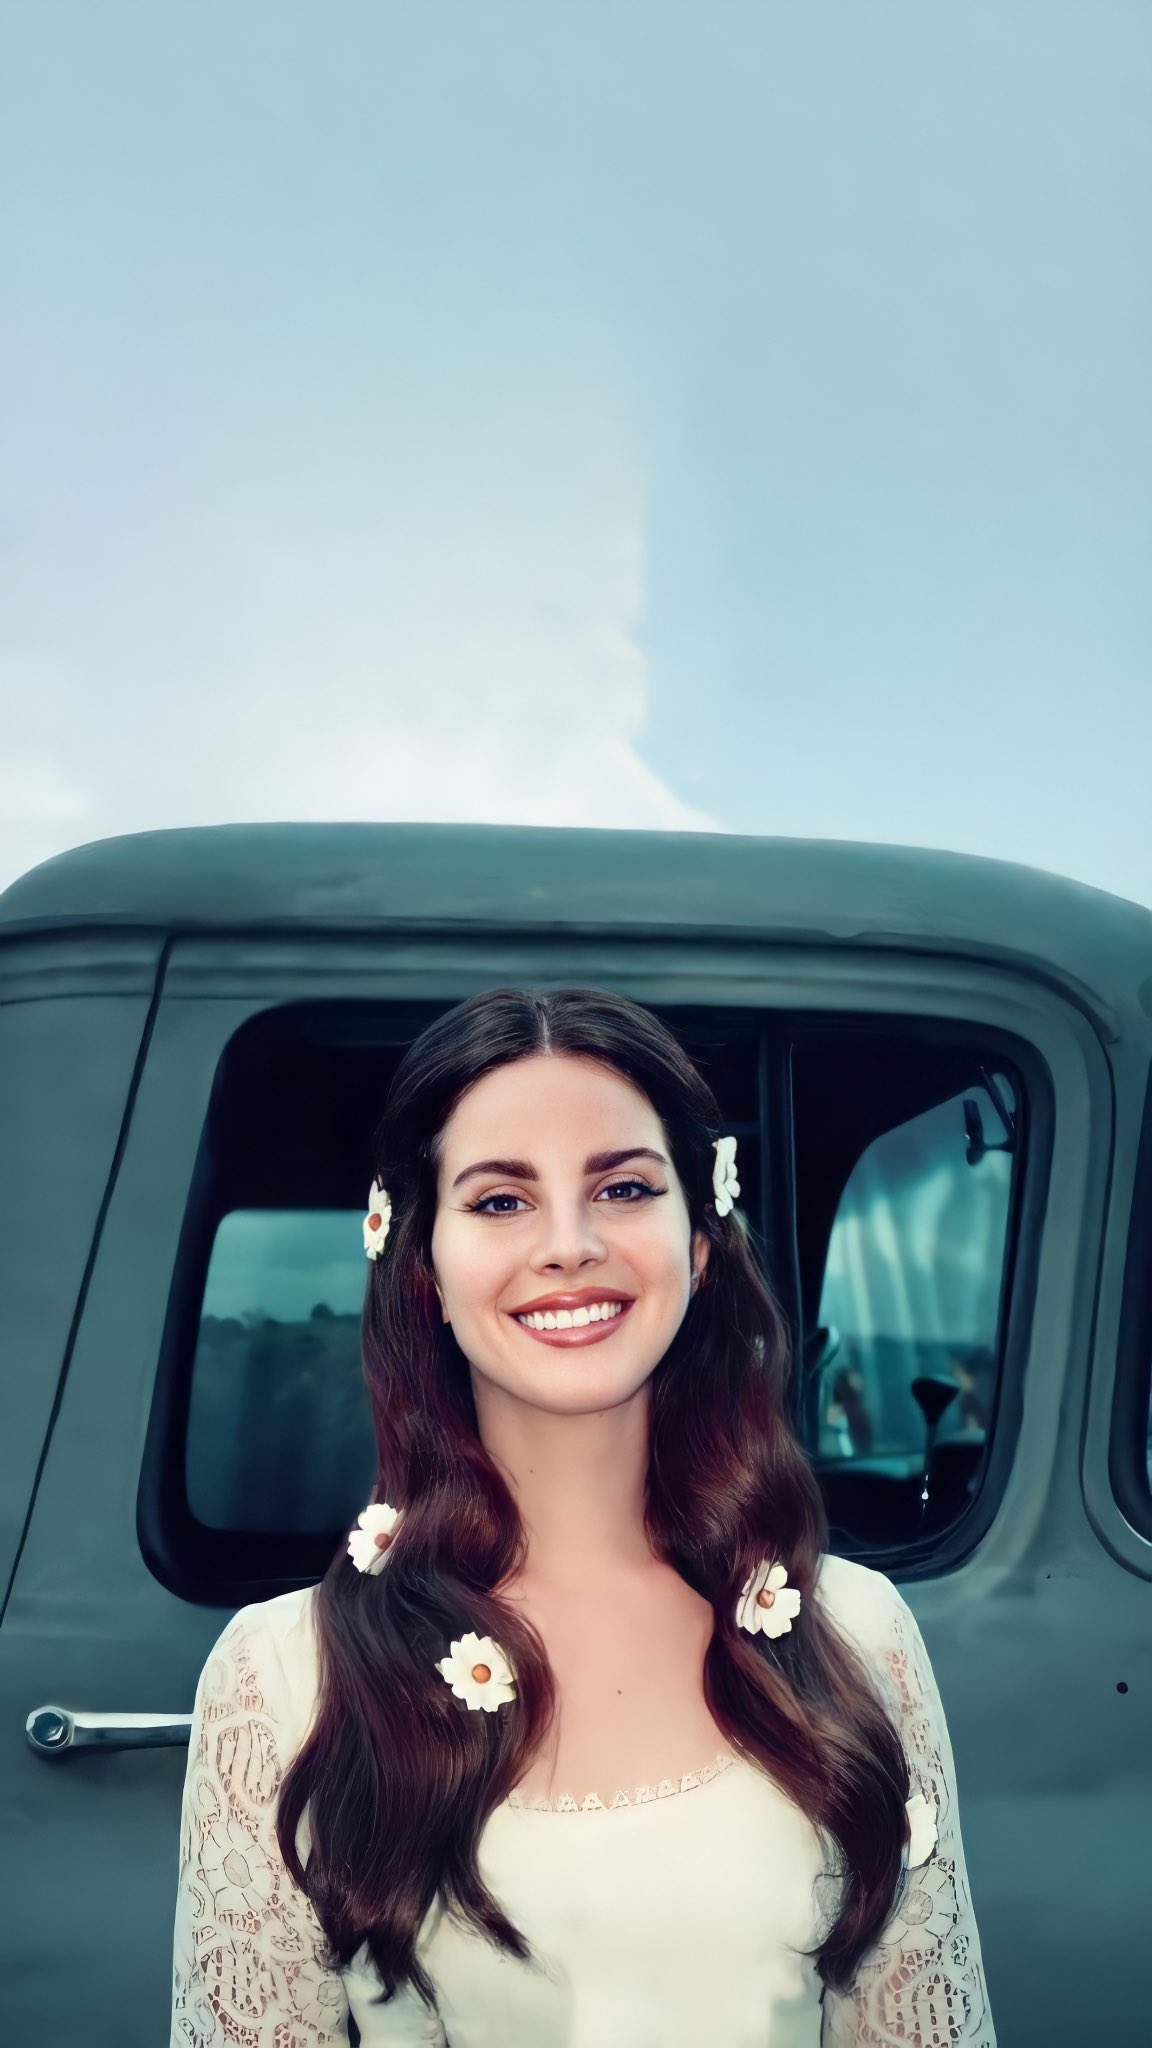 LDR Crave Del Rey wallpaper ideas with the new iPhone iOS 16 update